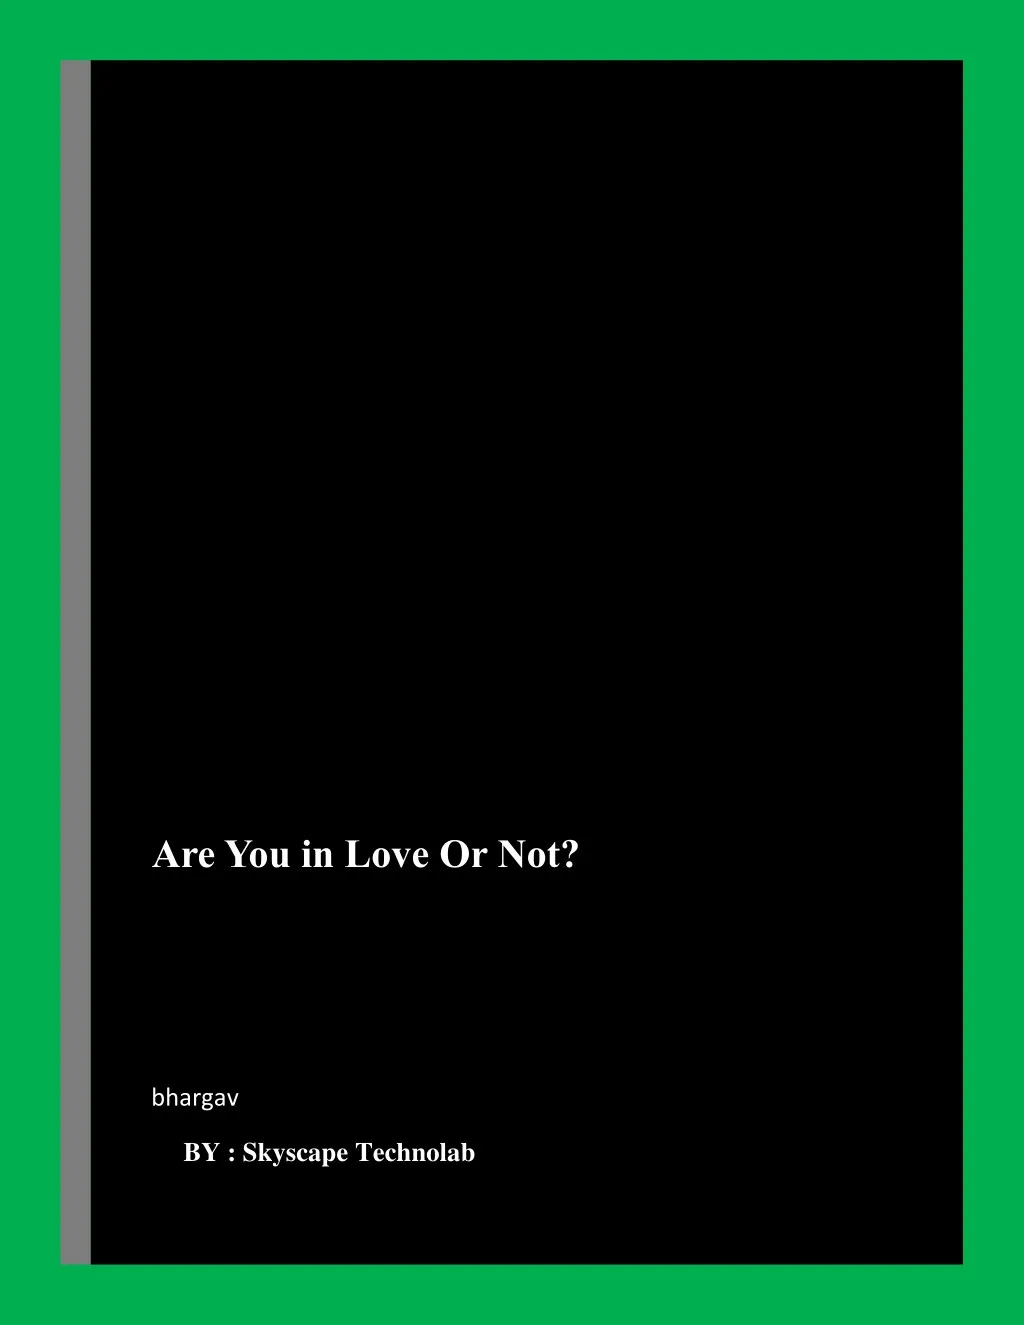 are you in love or not